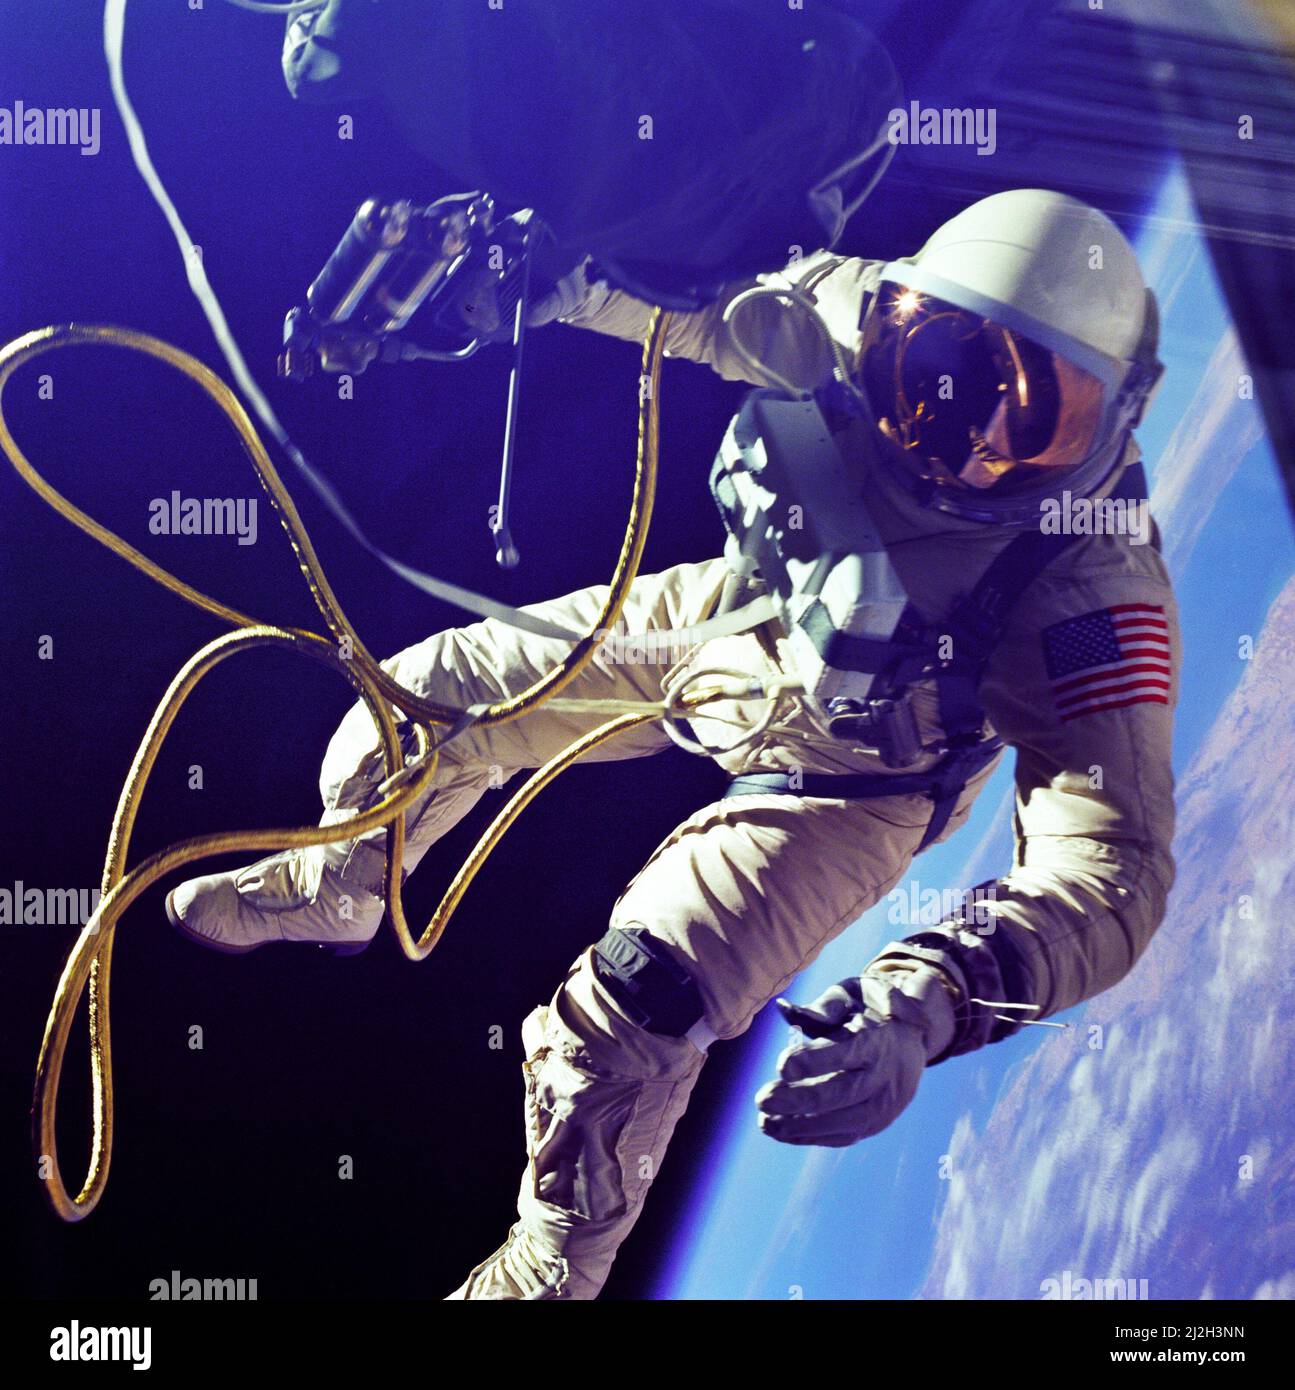 On June 3, 1965 Edward H. White II became the first American to step outside his spacecraft and let go, effectively setting himself adrift in the zero gravity of space. For 23 minutes White floated and maneuvered himself around the Gemini spacecraft while logging 6500 miles during his orbital stroll. White was attached to the spacecraft by a 25 foot umbilical line and a 23-ft. tether line, both wrapped in gold tape to form one cord. In his right hand White carries a Hand Held Self Maneuvering Unit (HHSMU) which is used to move about the weightless environment of space. The visor of his helmet Stock Photo